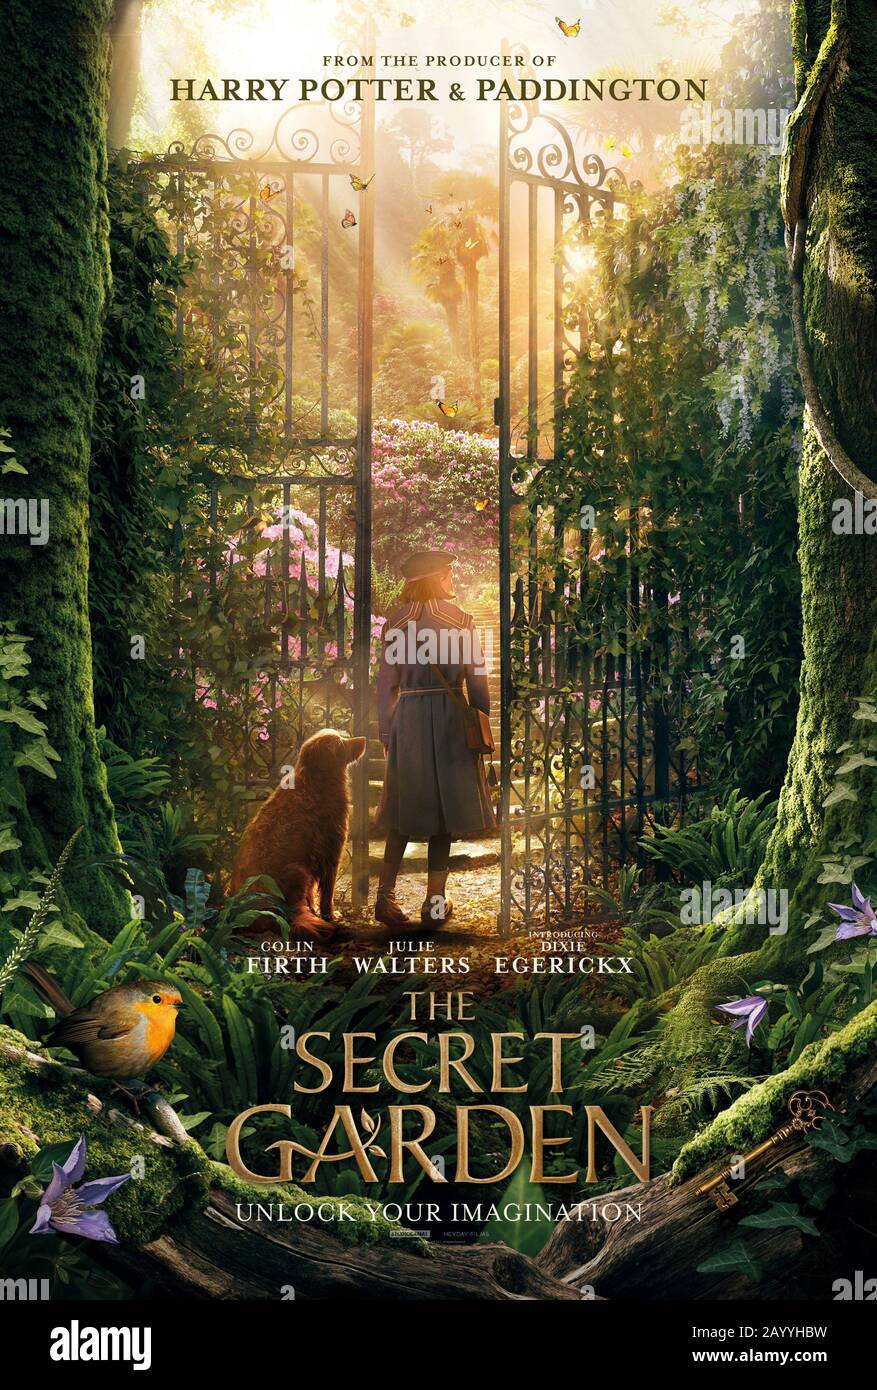 The Secret Garden (2020) directed by Marc Munden and starring Dixie Egerickx, Colin Firth, and Julie Walters. Frances Hodgson Burnett much loved story about an orphaned girl who discovering a hidden garden. Stock Photo